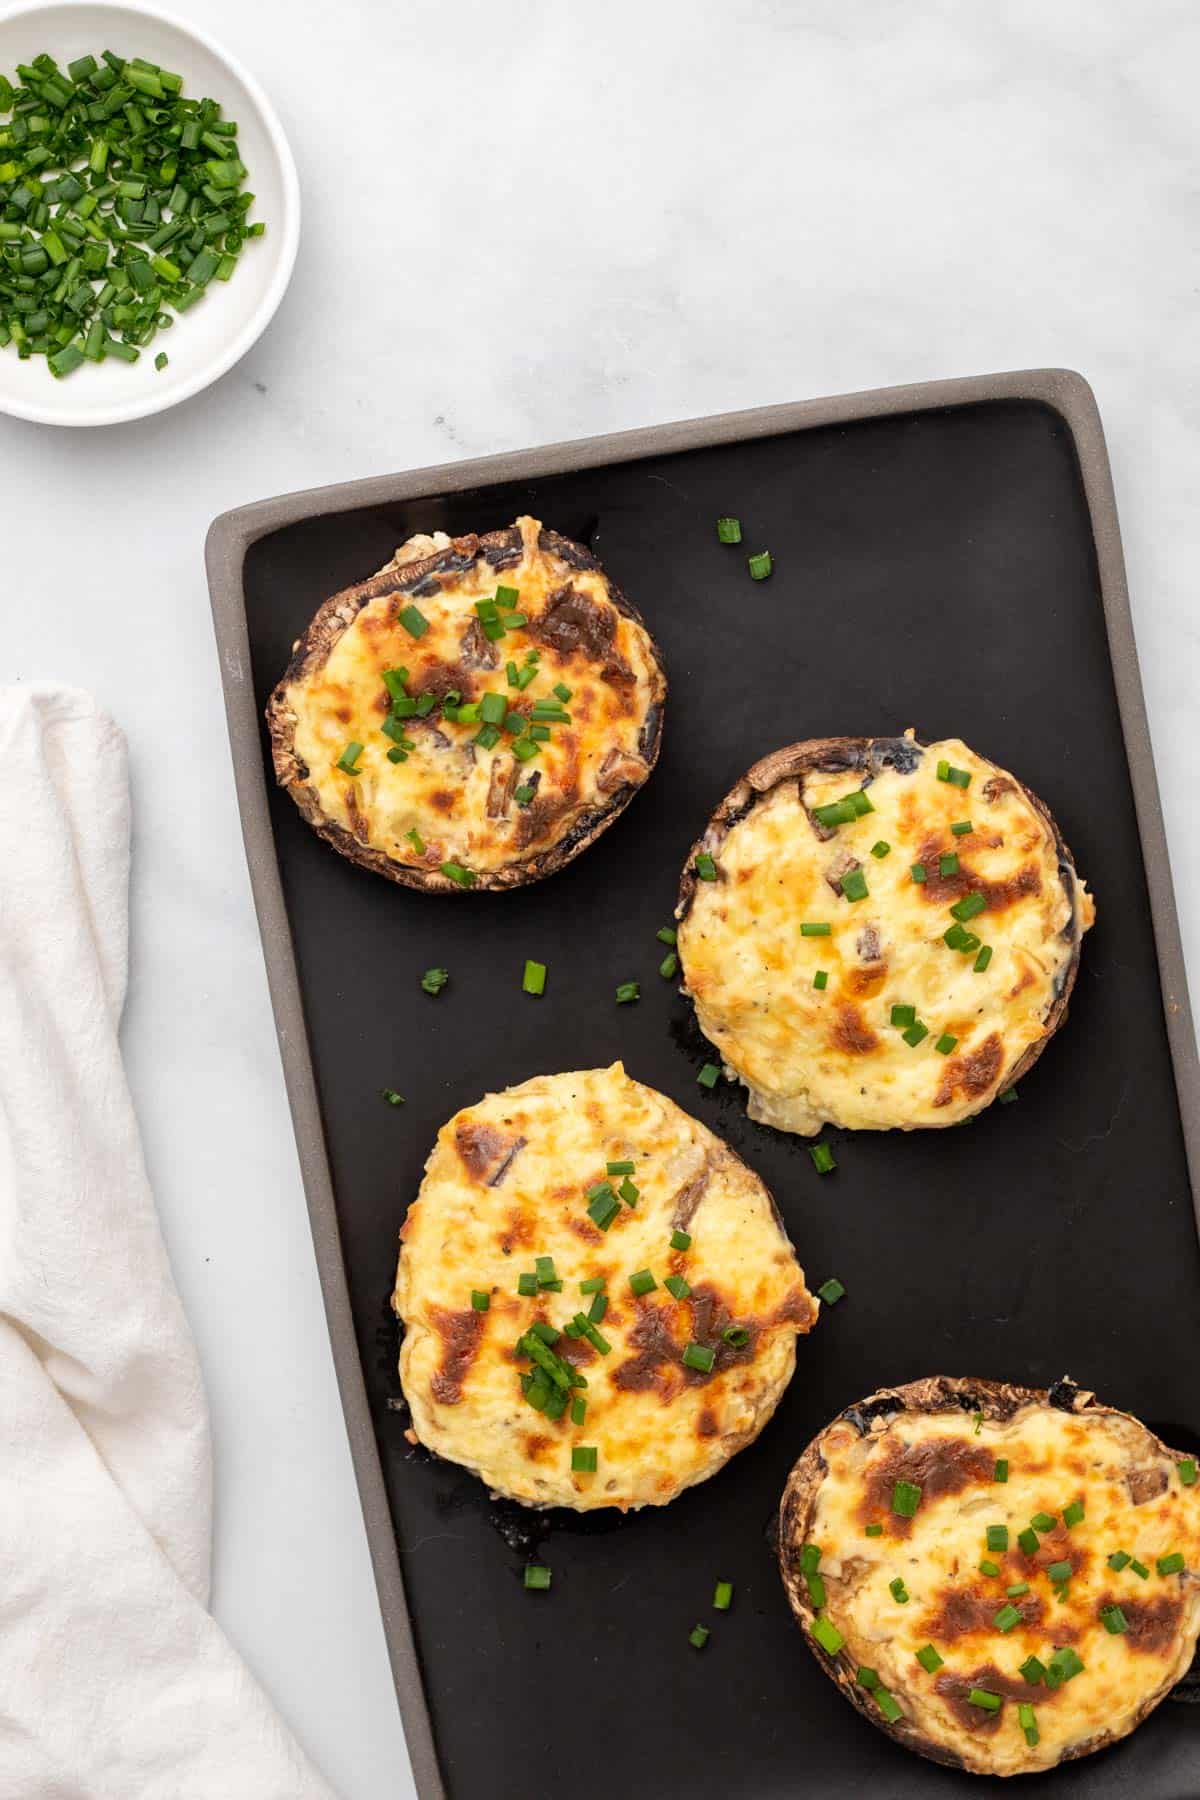 Mushrooms stuffed with cheese and garnished with chives, as seen from above